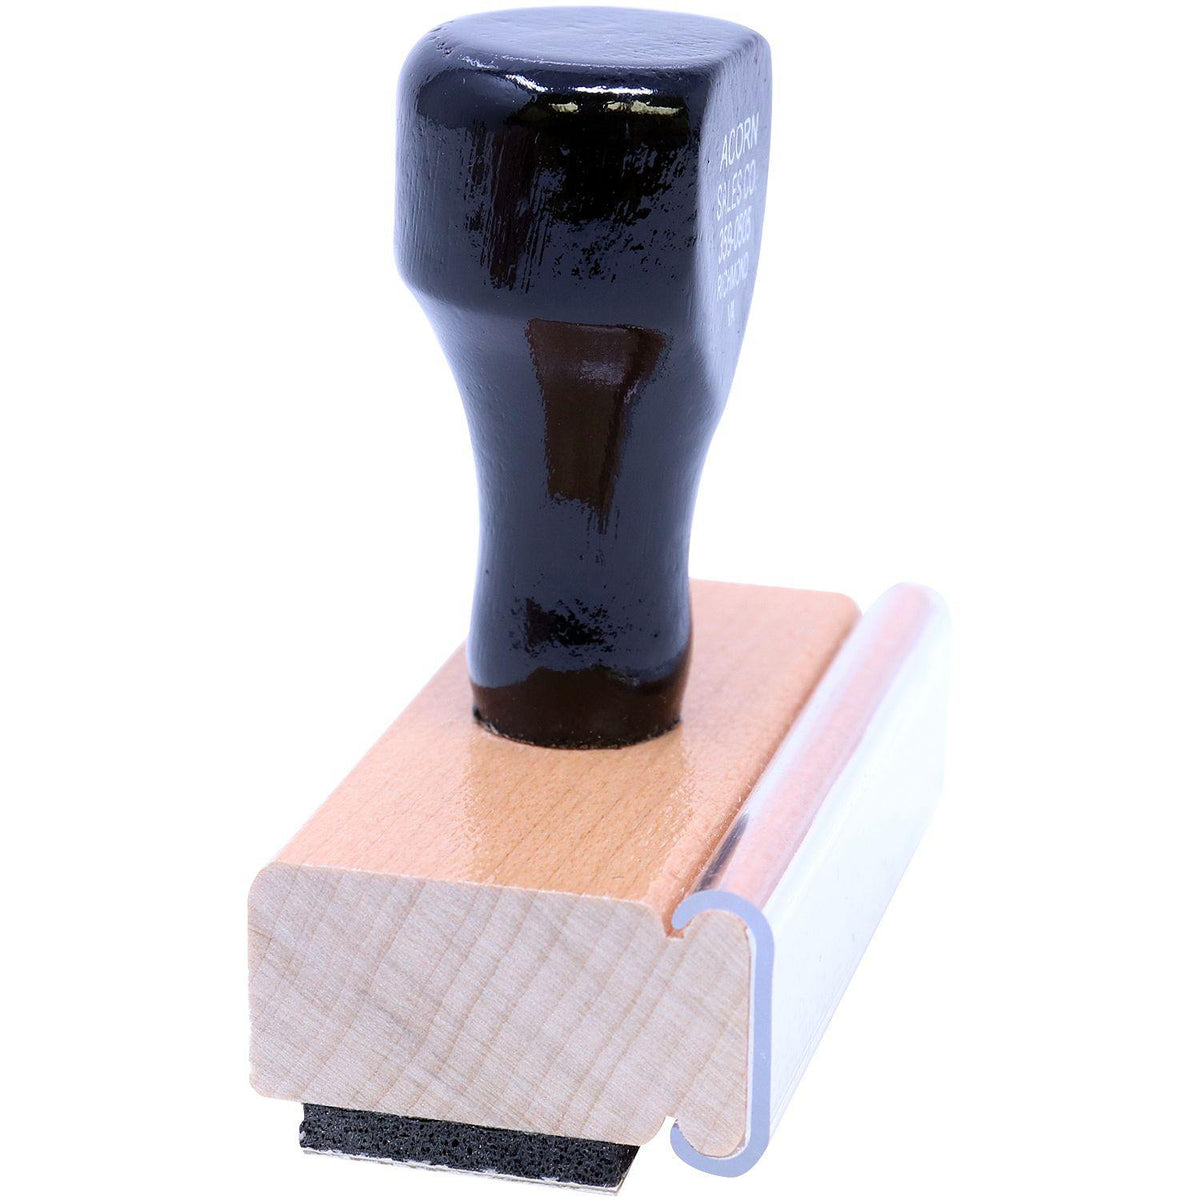 Large Verified Rubber Stamp - Engineer Seal Stamps - Brand_Acorn, Impression Size_Large, Stamp Type_Regular Stamp, Type of Use_Office